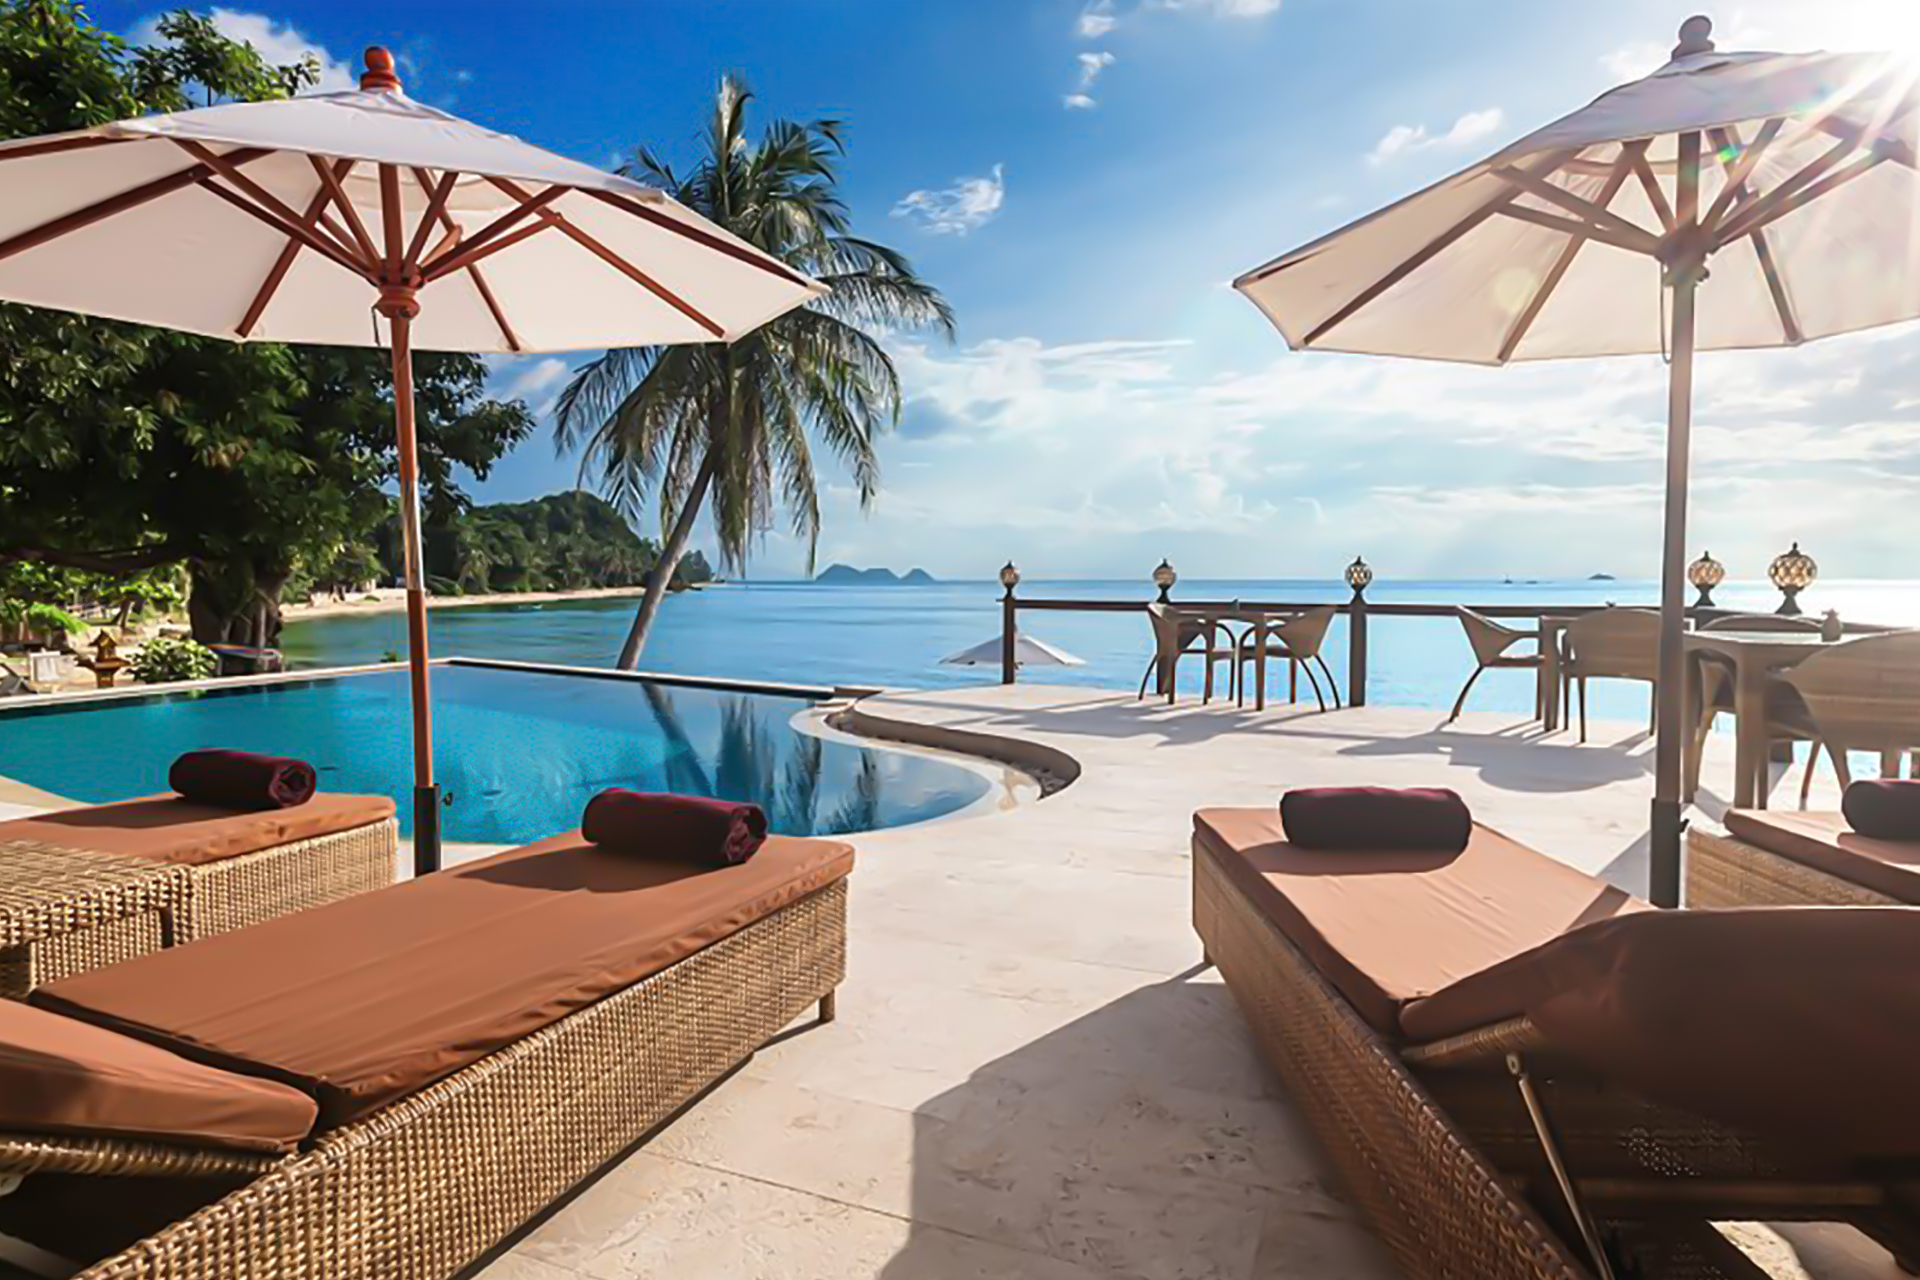 Escape to Paradise at our Thailand Resort